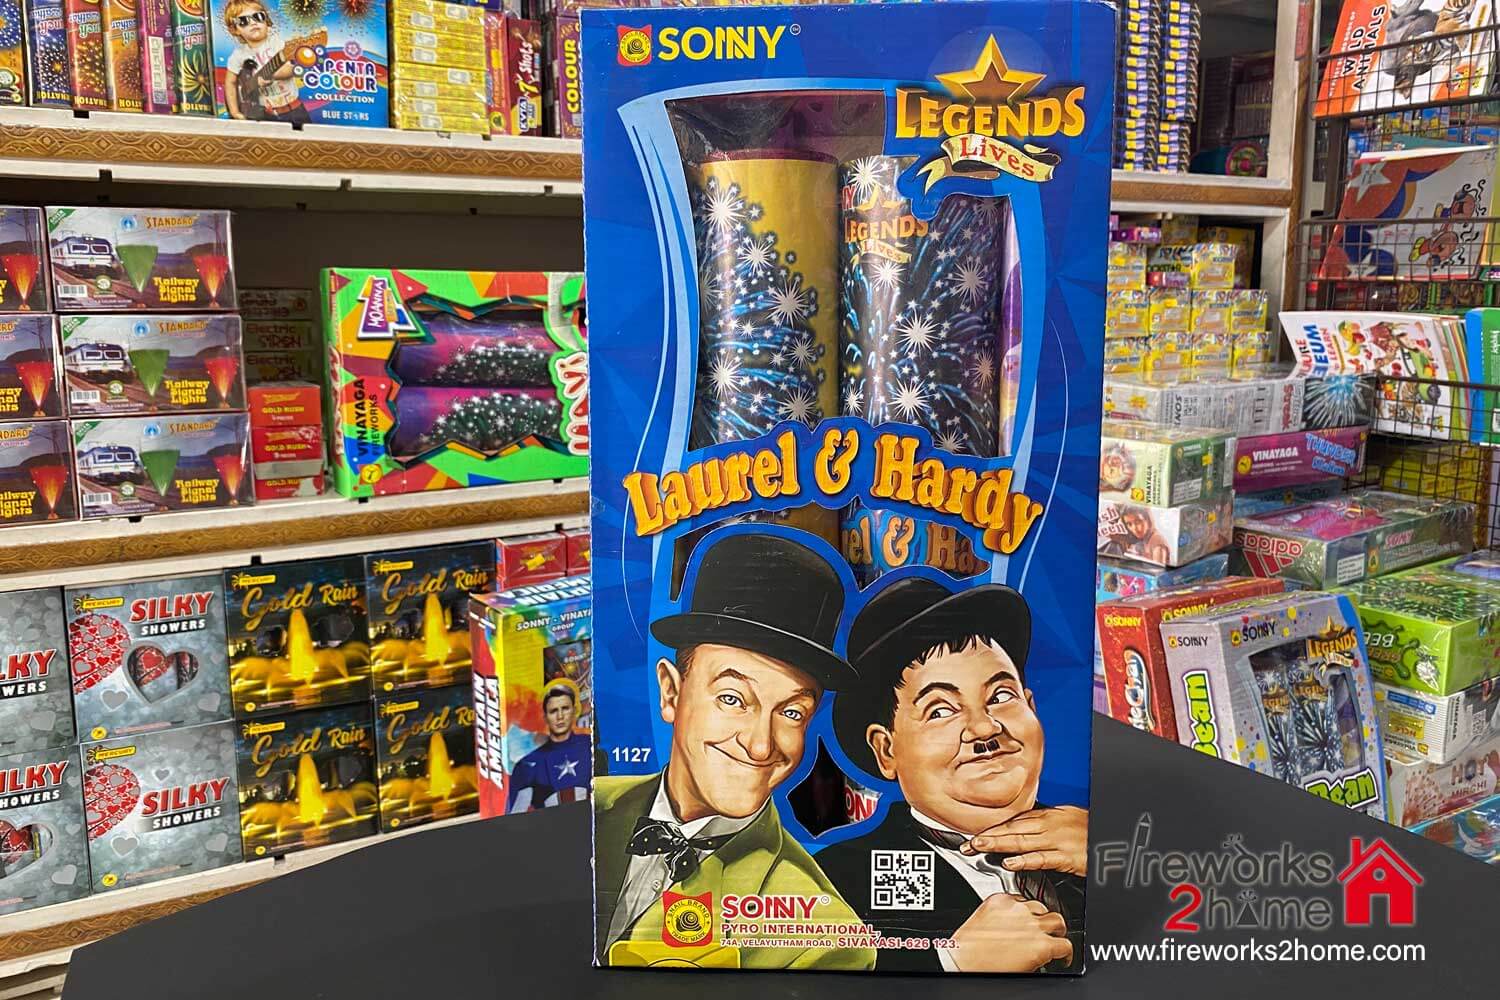 Laurel and Hardy Sky Shot by Sony (pieces per box 2)